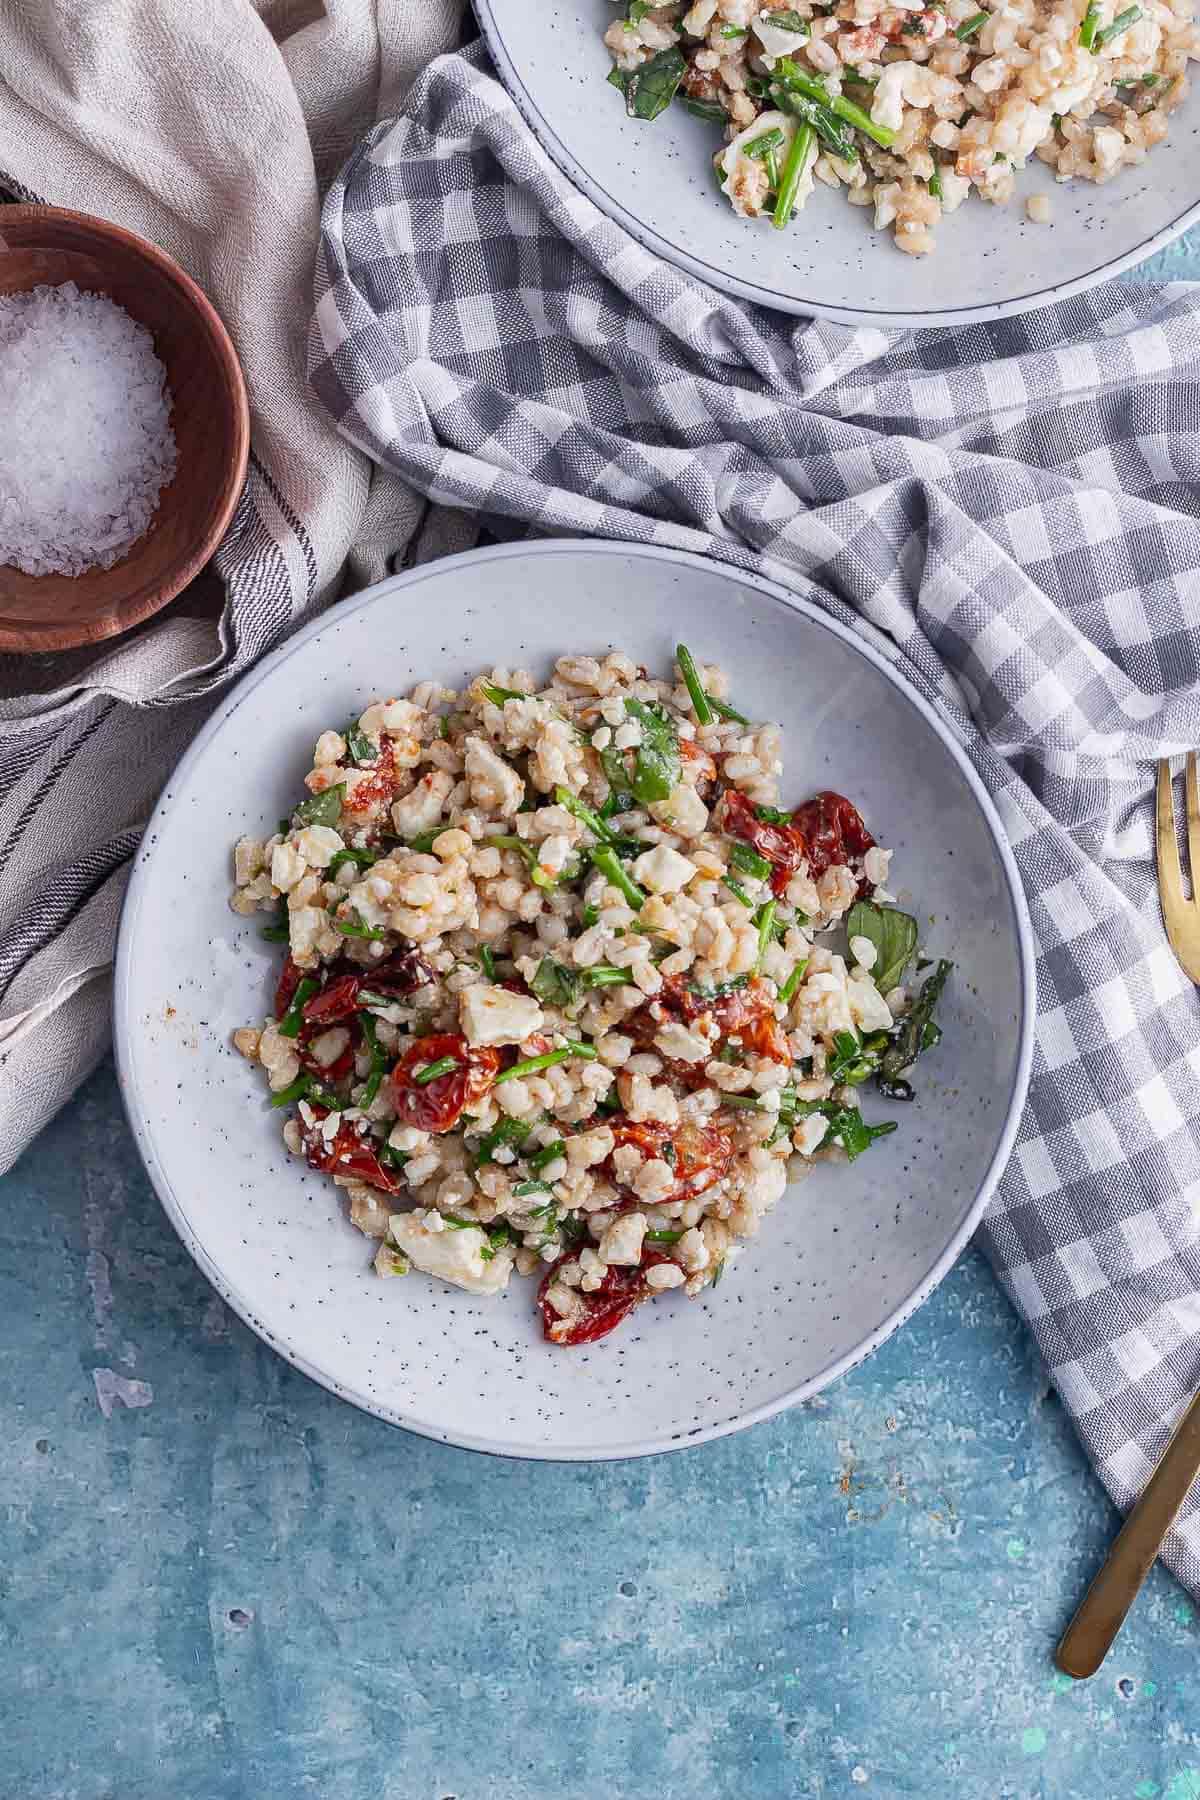 Flat lay shot of a bowl of pearl barley salad with a checked cloth on a blue background